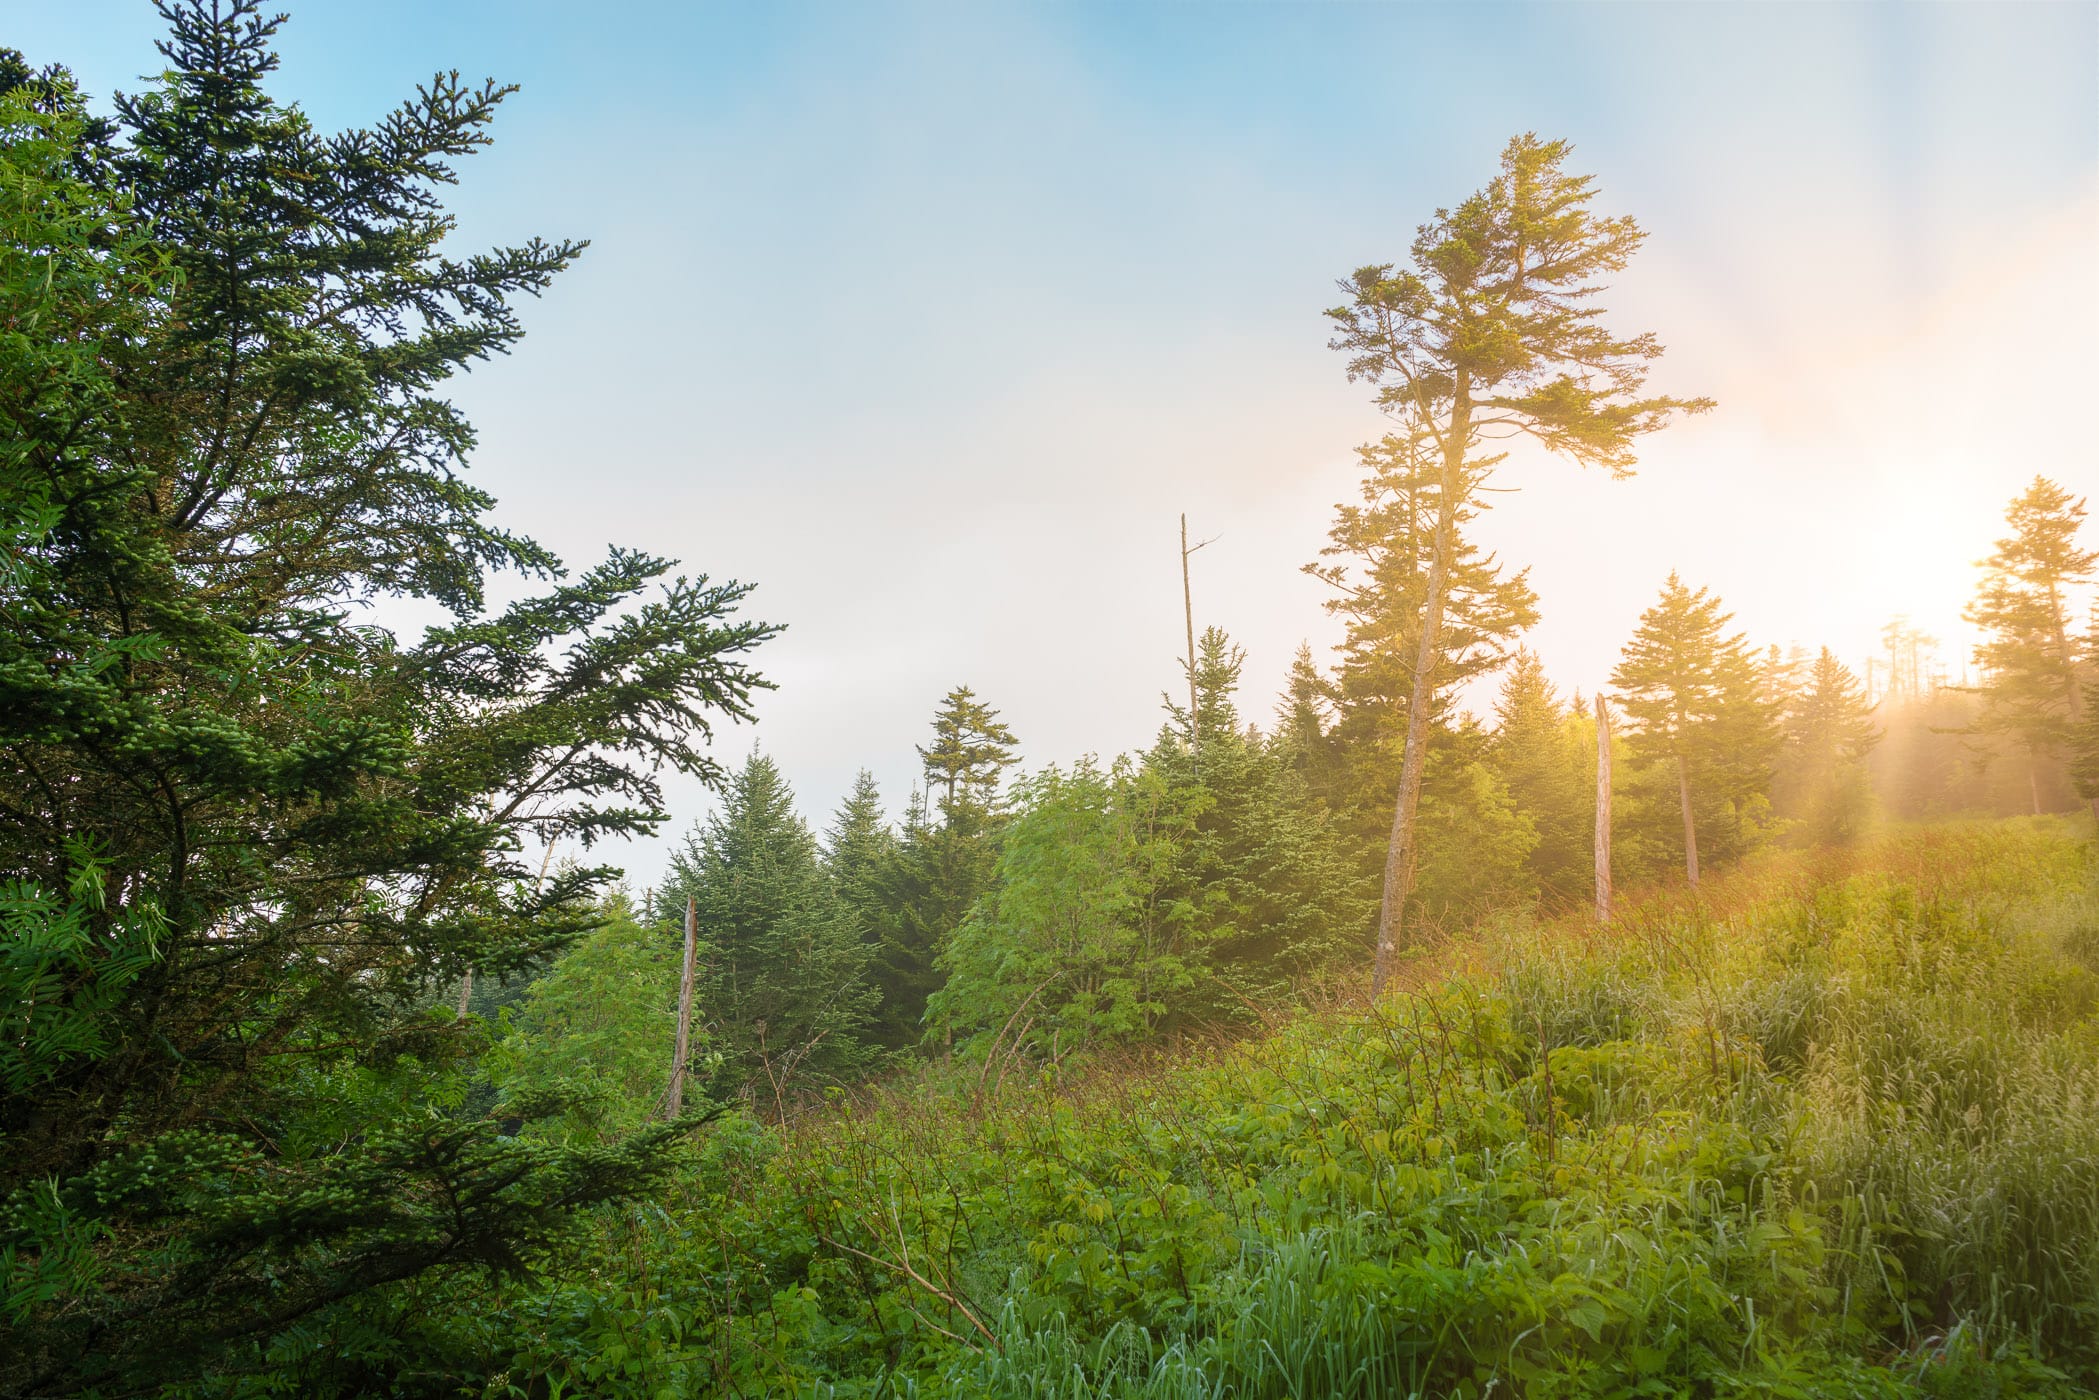 The sun rises on the slopes of Clingmans Dome in the Great Smoky Mountains National Park, Tennessee.